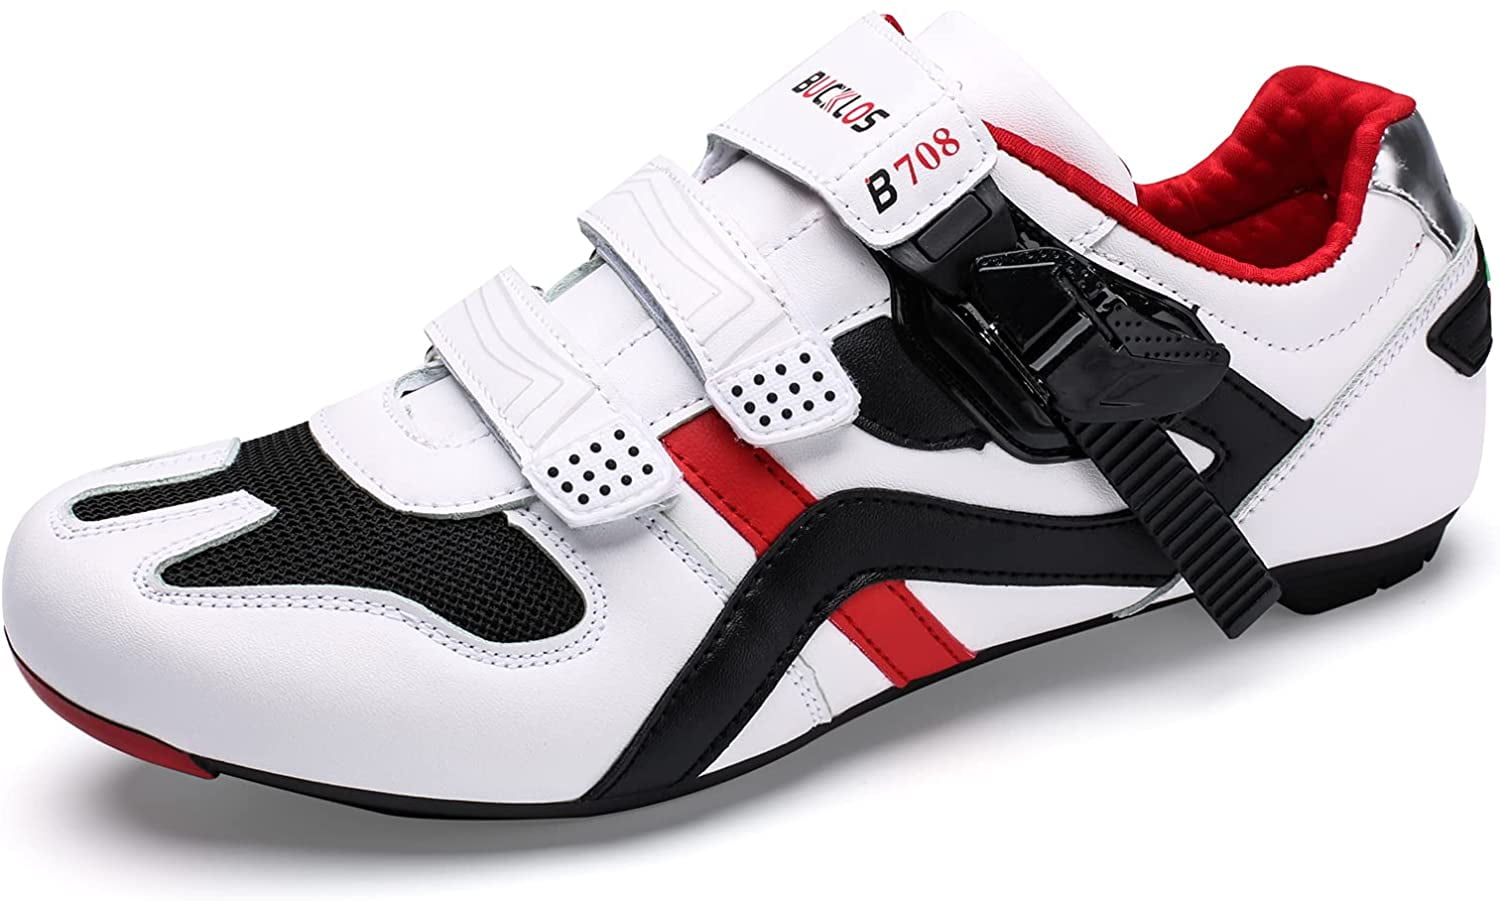 Details about   Mountain Cycling Shoes Mtb Men Bicycle Sneakers Self-Locking Racing Bike Shoes 